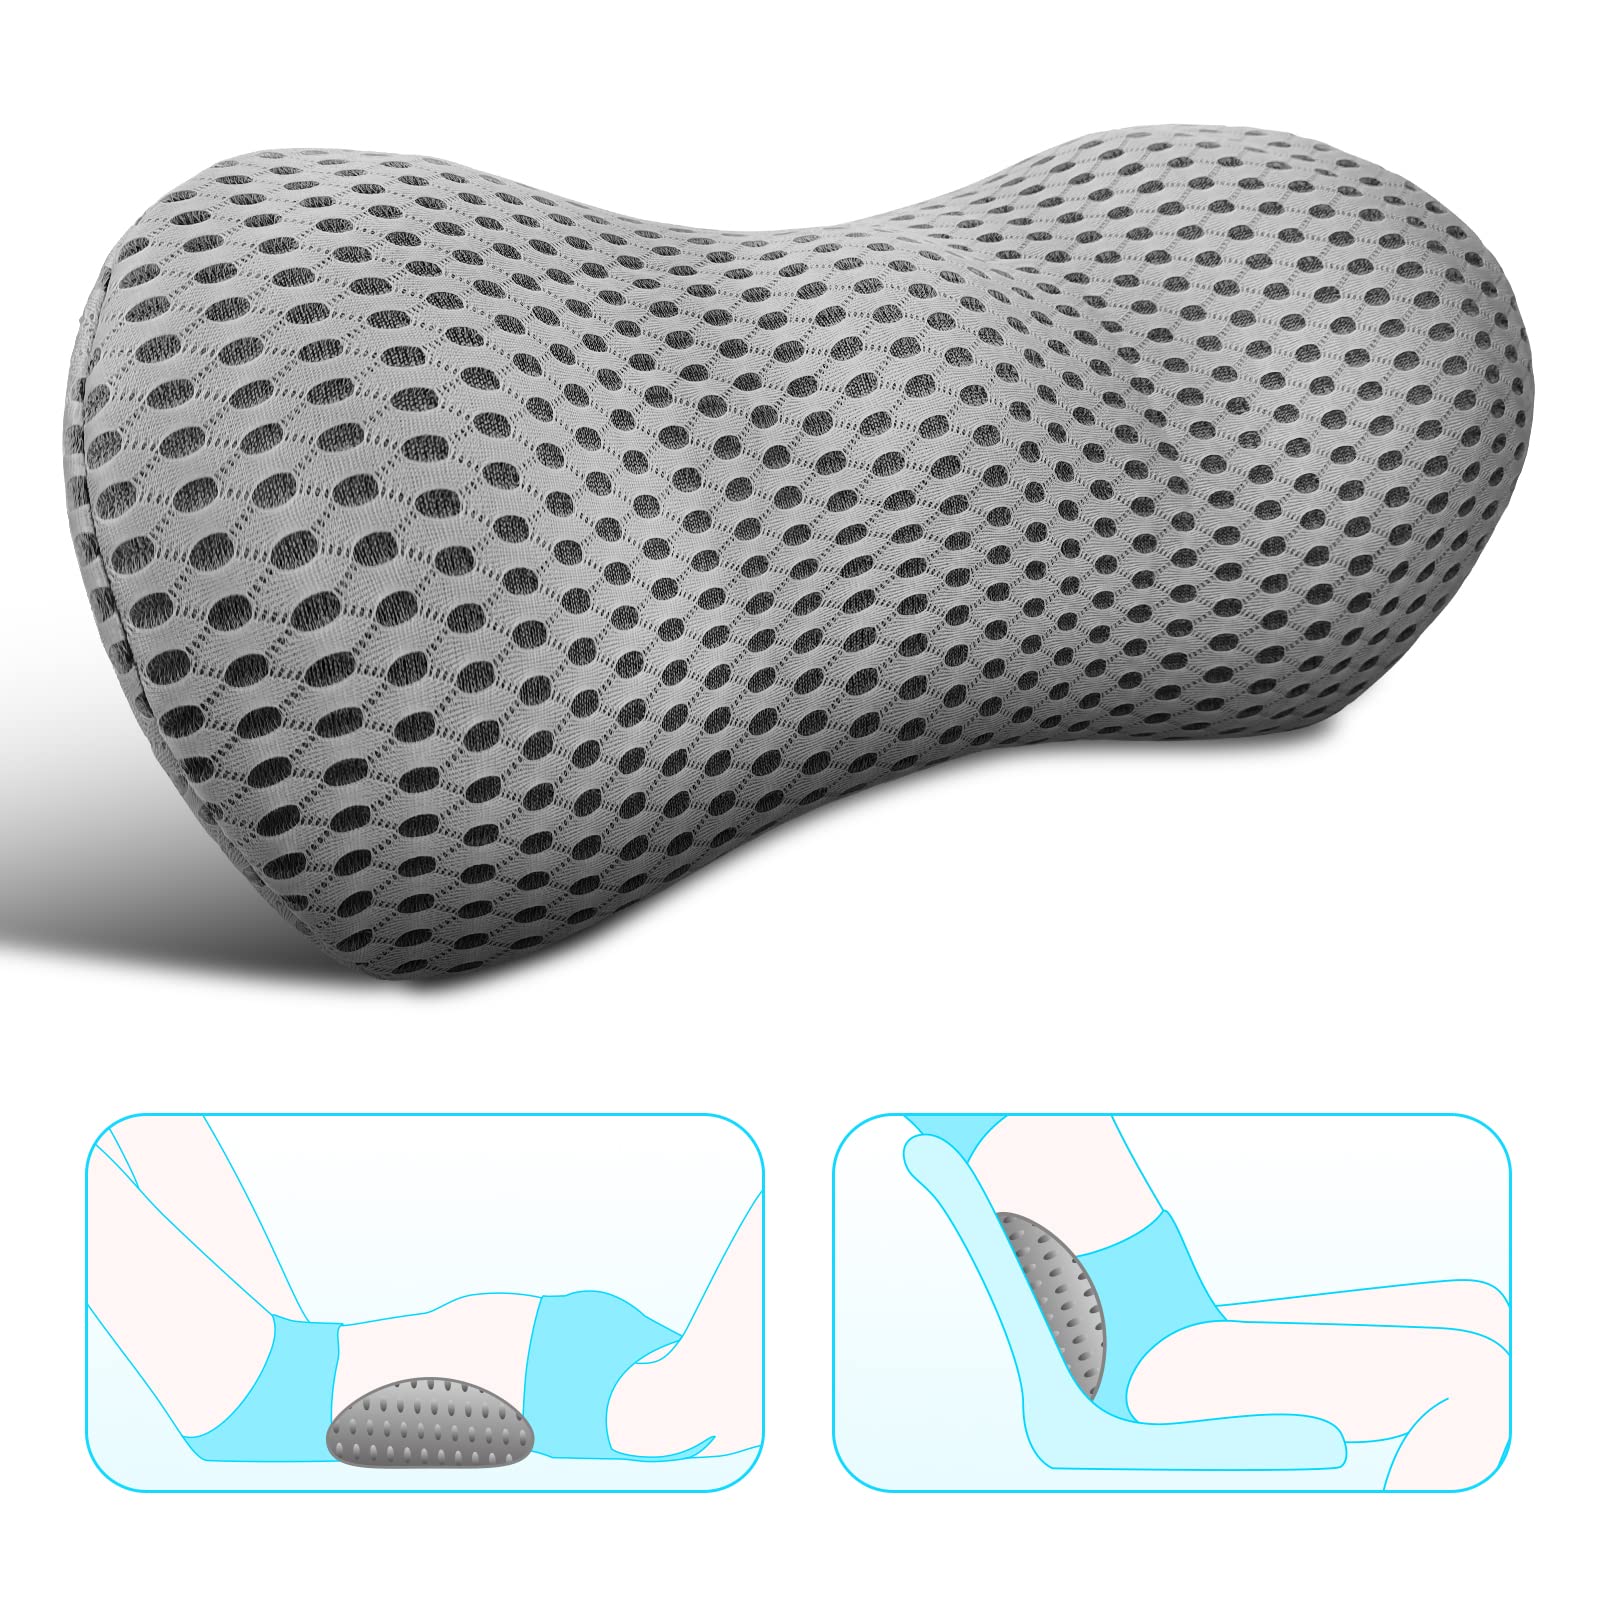  seeknow Lumbar Support Pillow for Chair Back Support Pillow for  Couch Lumbar Pillow for Car Office Chair Back Cushion for Lower Back Pain  Memory Foam Back Rest for Desk Chair, Recliner